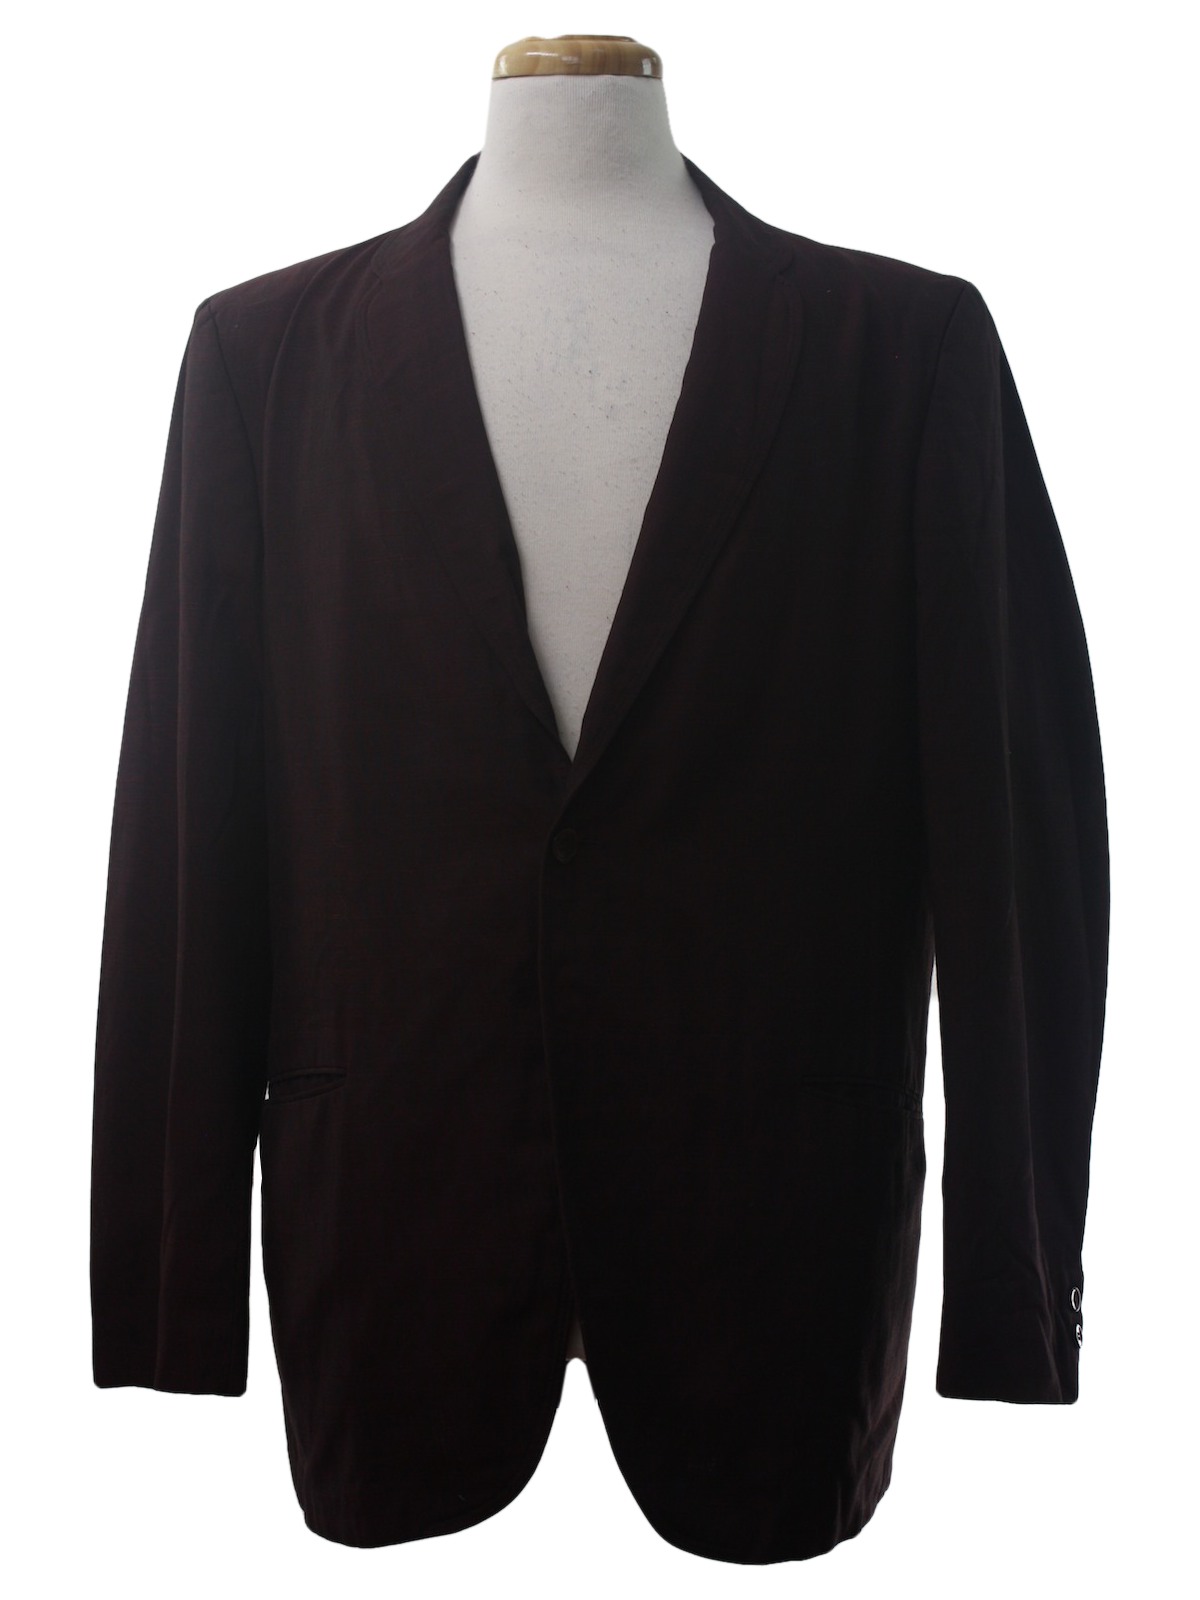 1960s Vintage Jacket: 60s -Trend Shop- Mens wine and black faint flat  textured box weave silk and cotton blend, light weight single button mod, smoking  jacket cut blazer with two lower inset